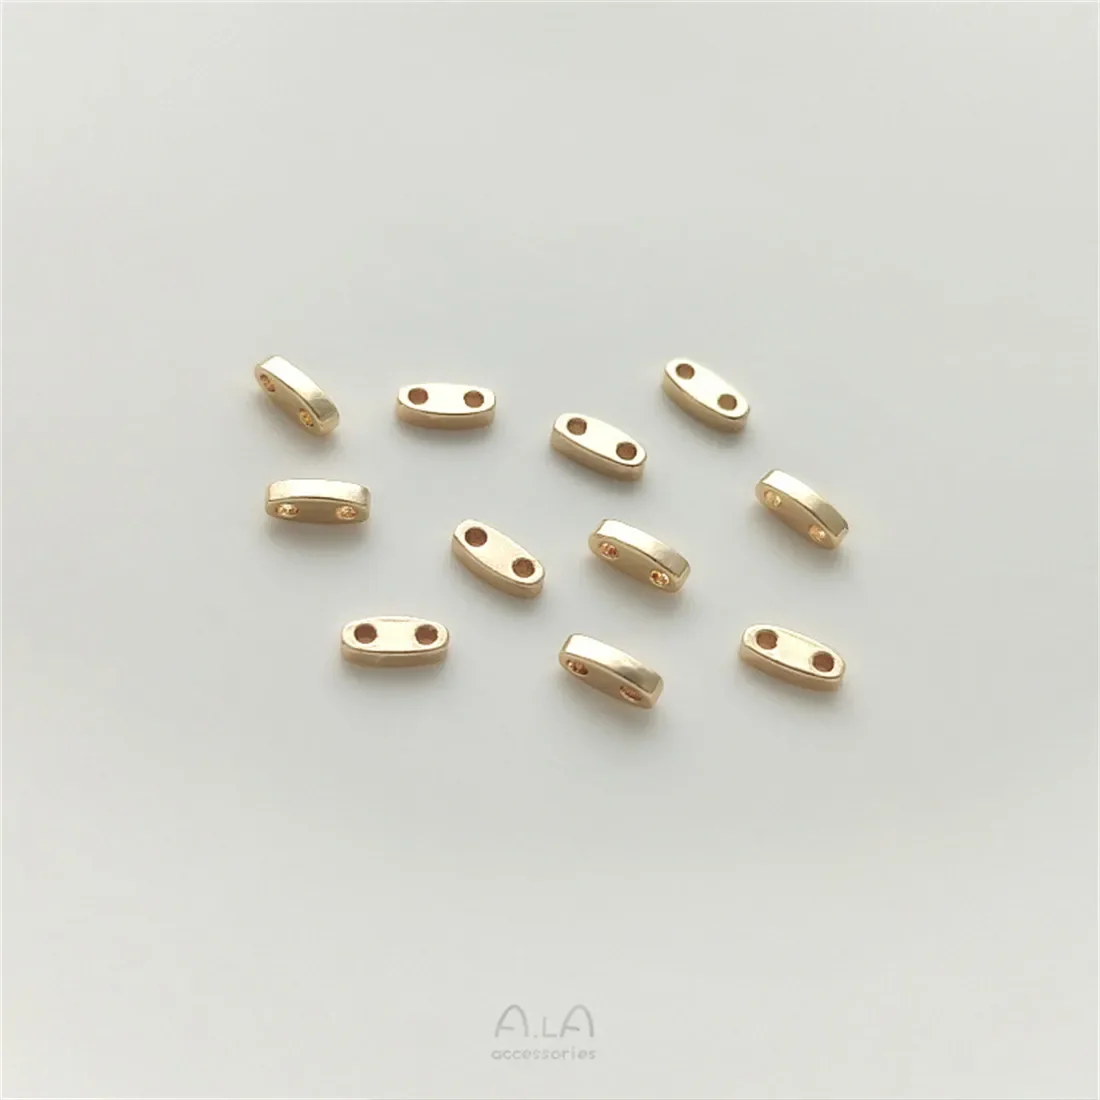 14K Gold-coated Double-row Millet Bead Spacer Accessories Double-hole Spacer Diy Handmade Beaded Bracelet Jewelry Materials C279